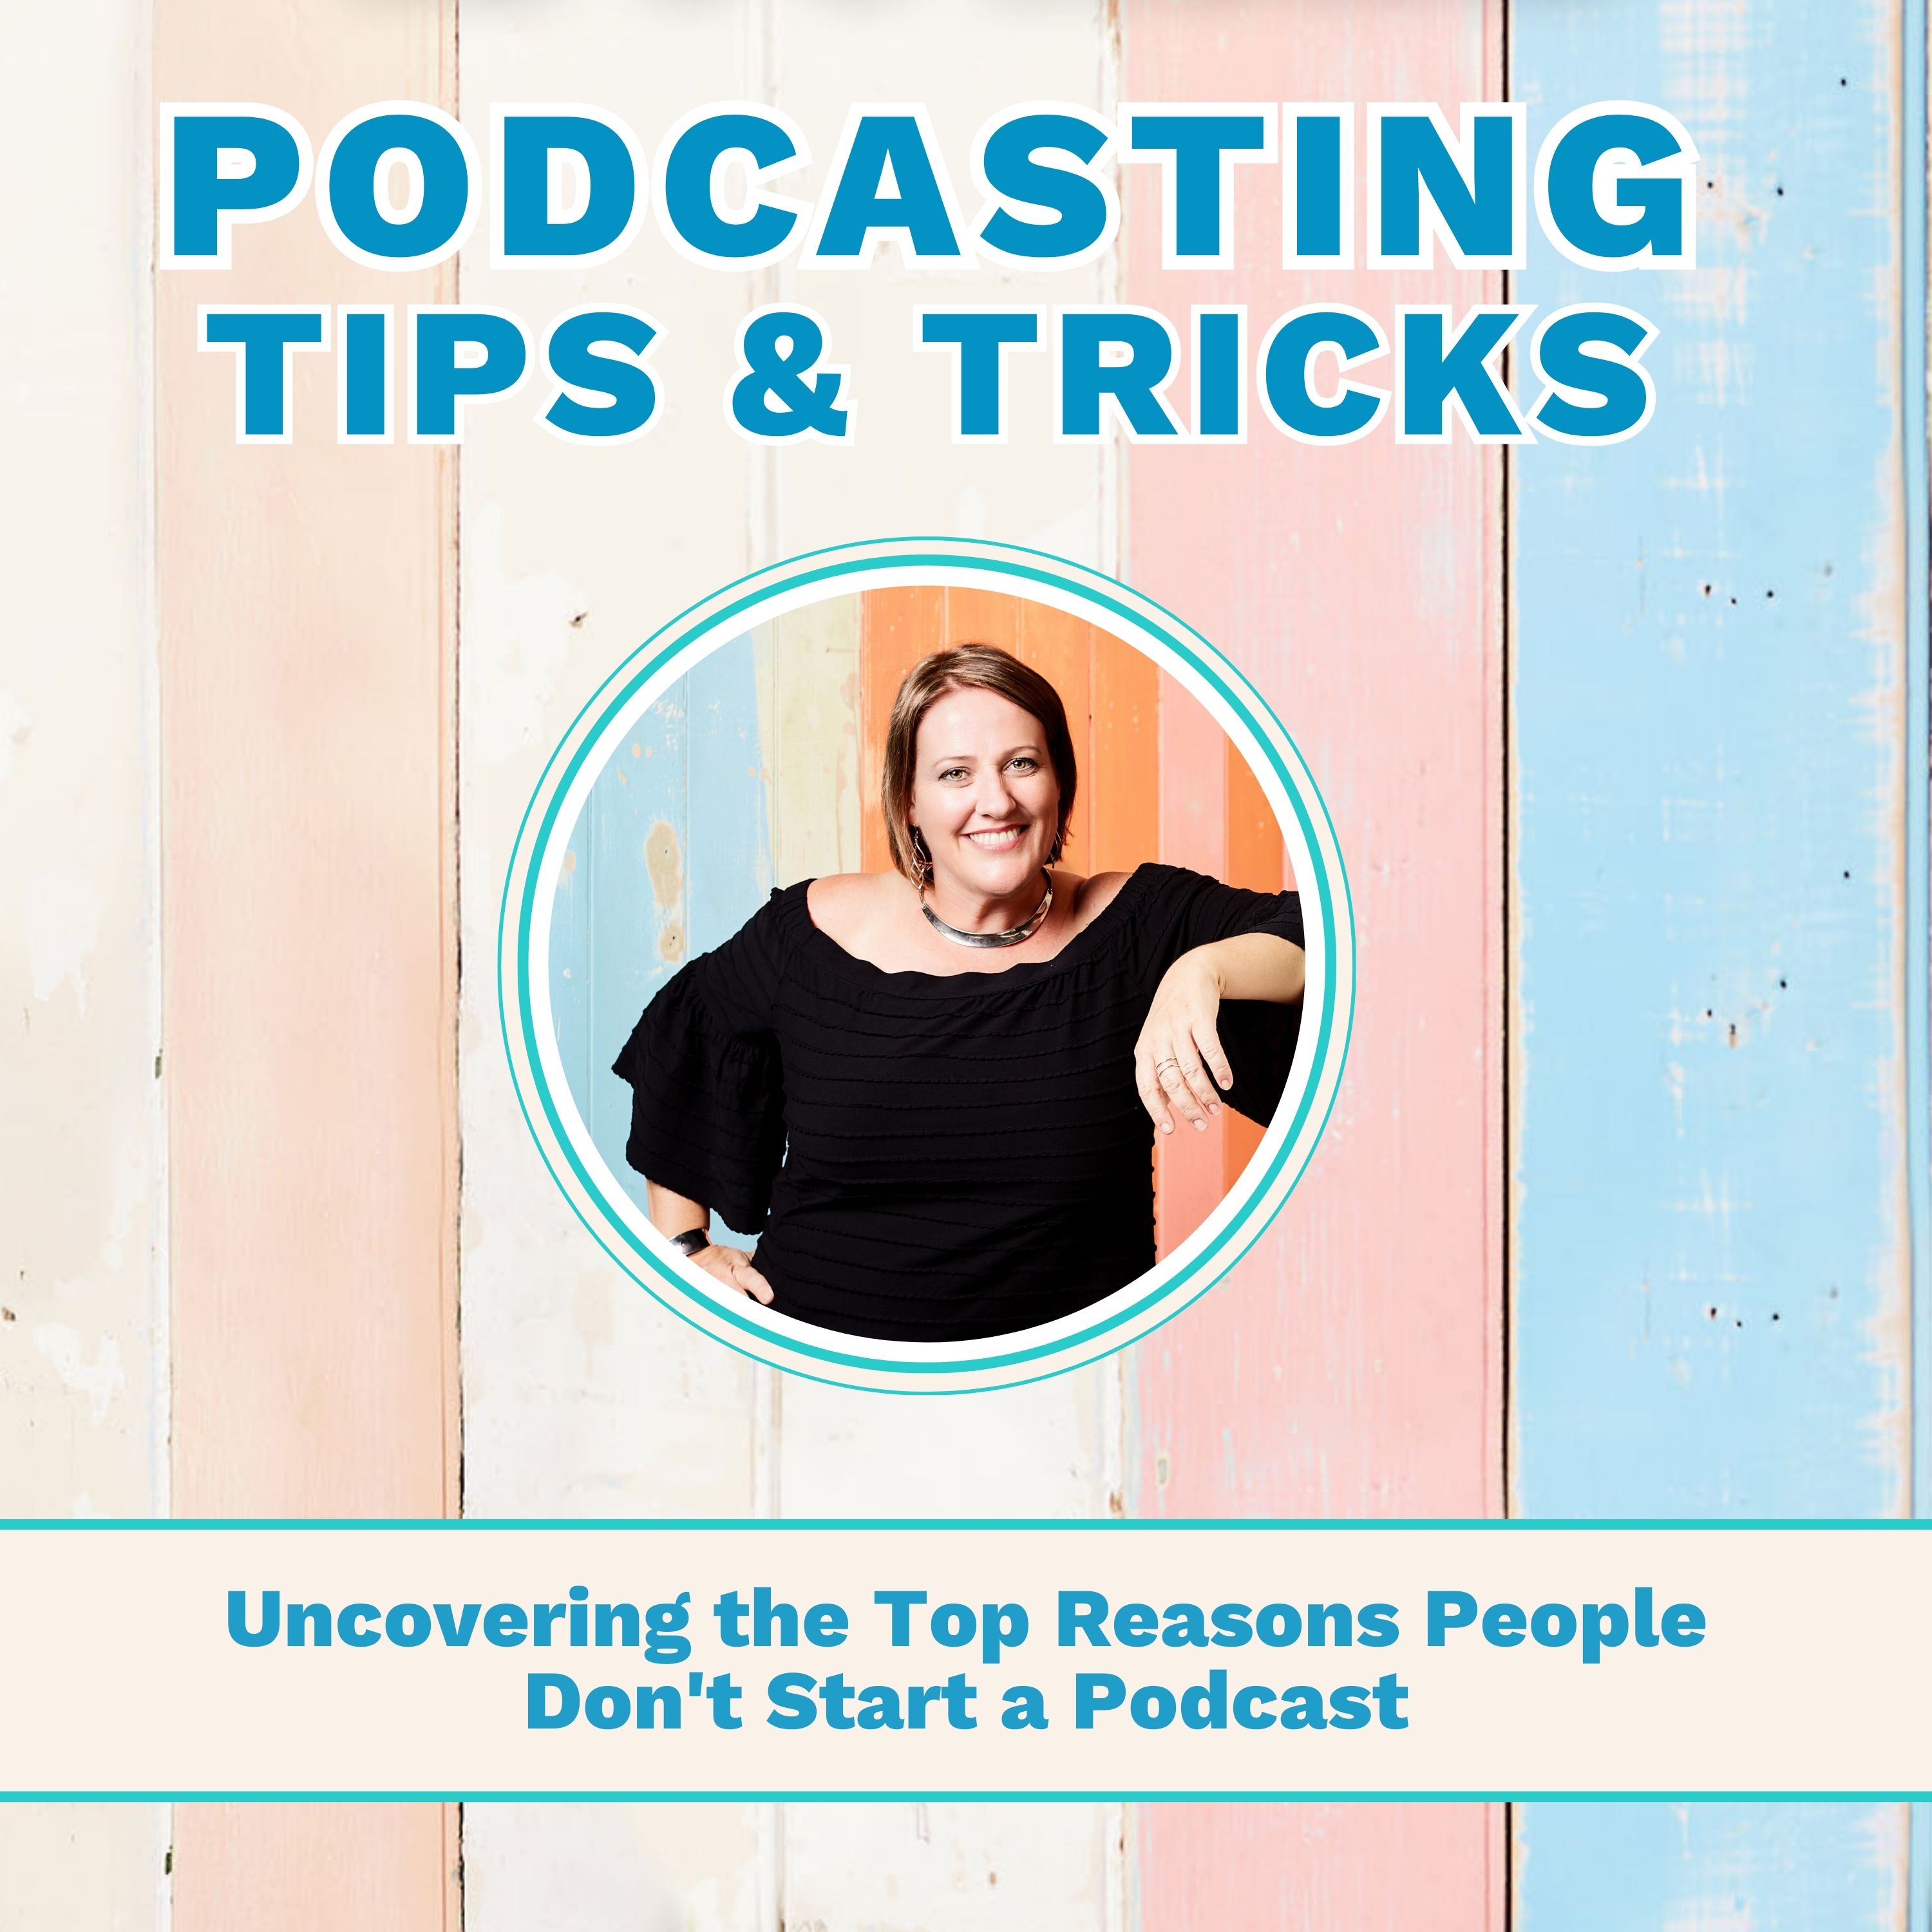 Uncovering the Top Reasons People Don’t Start a Podcast